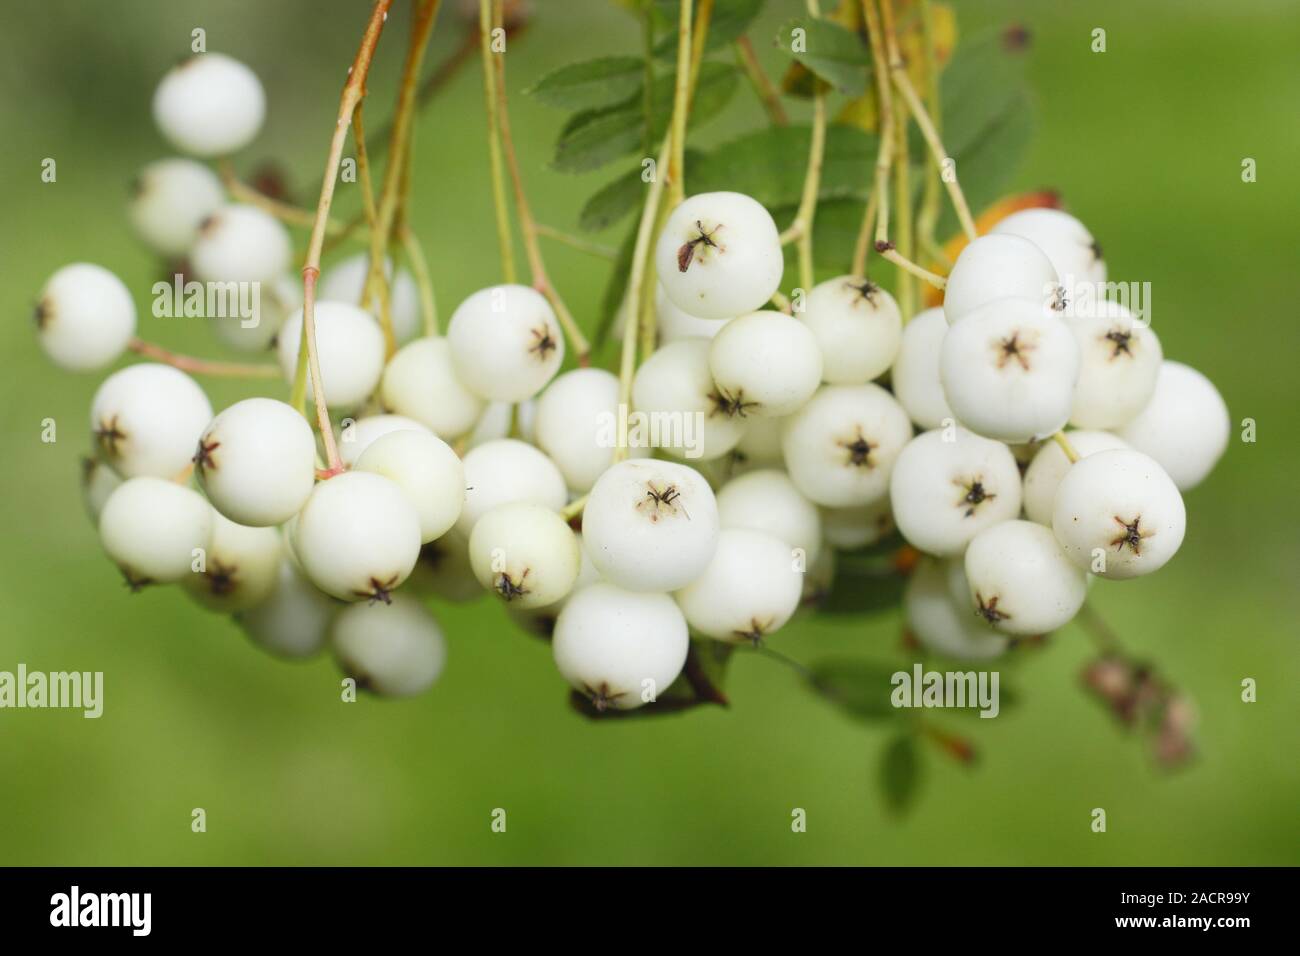 White Svidina - Poisonous White Berries And Green Bush Leaves Stock Photo,  Picture and Royalty Free Image. Image 83475909.